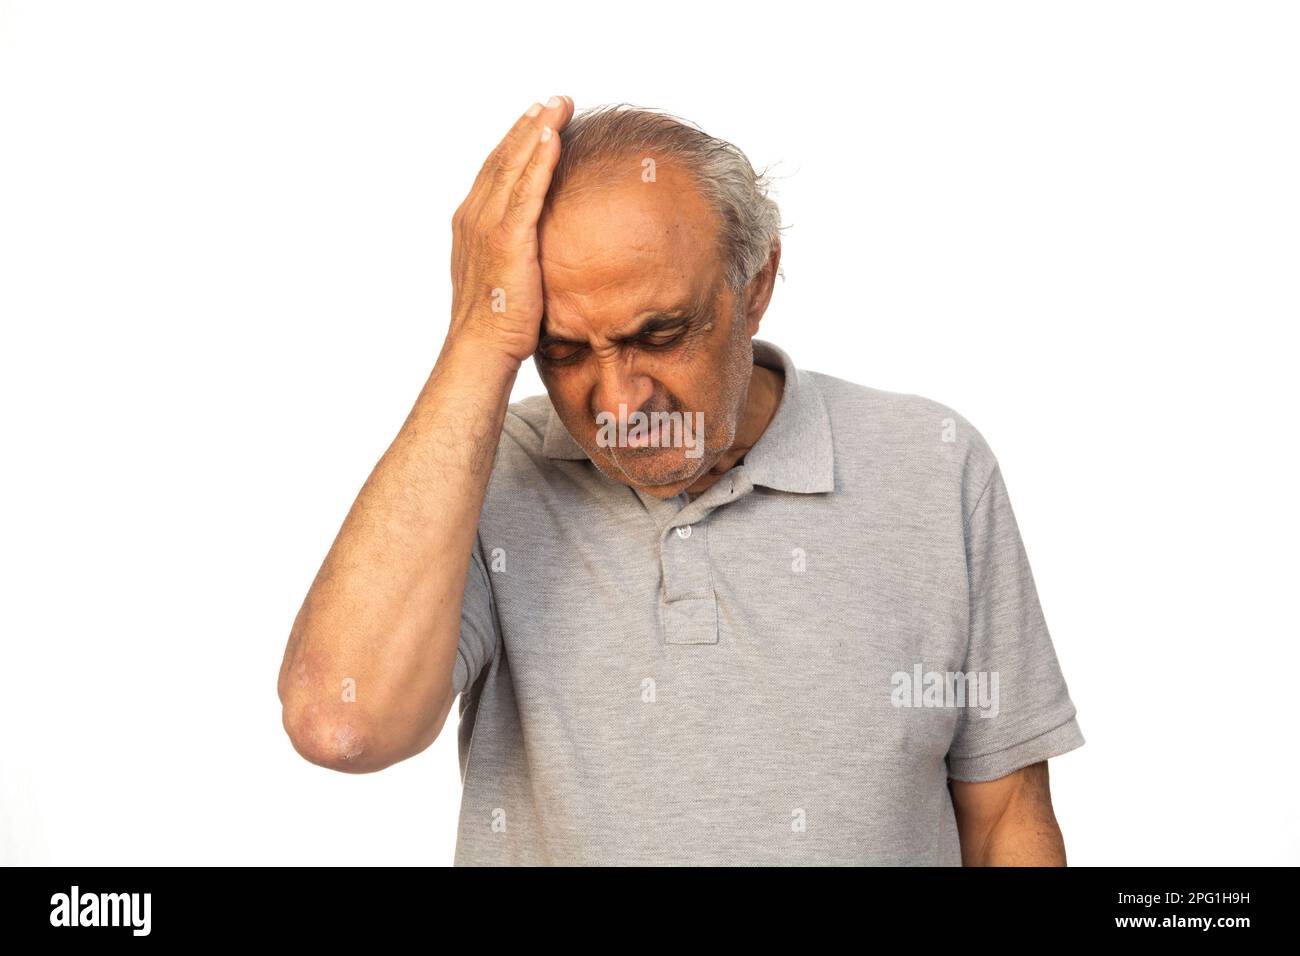 Old man with a headache Stock Photo